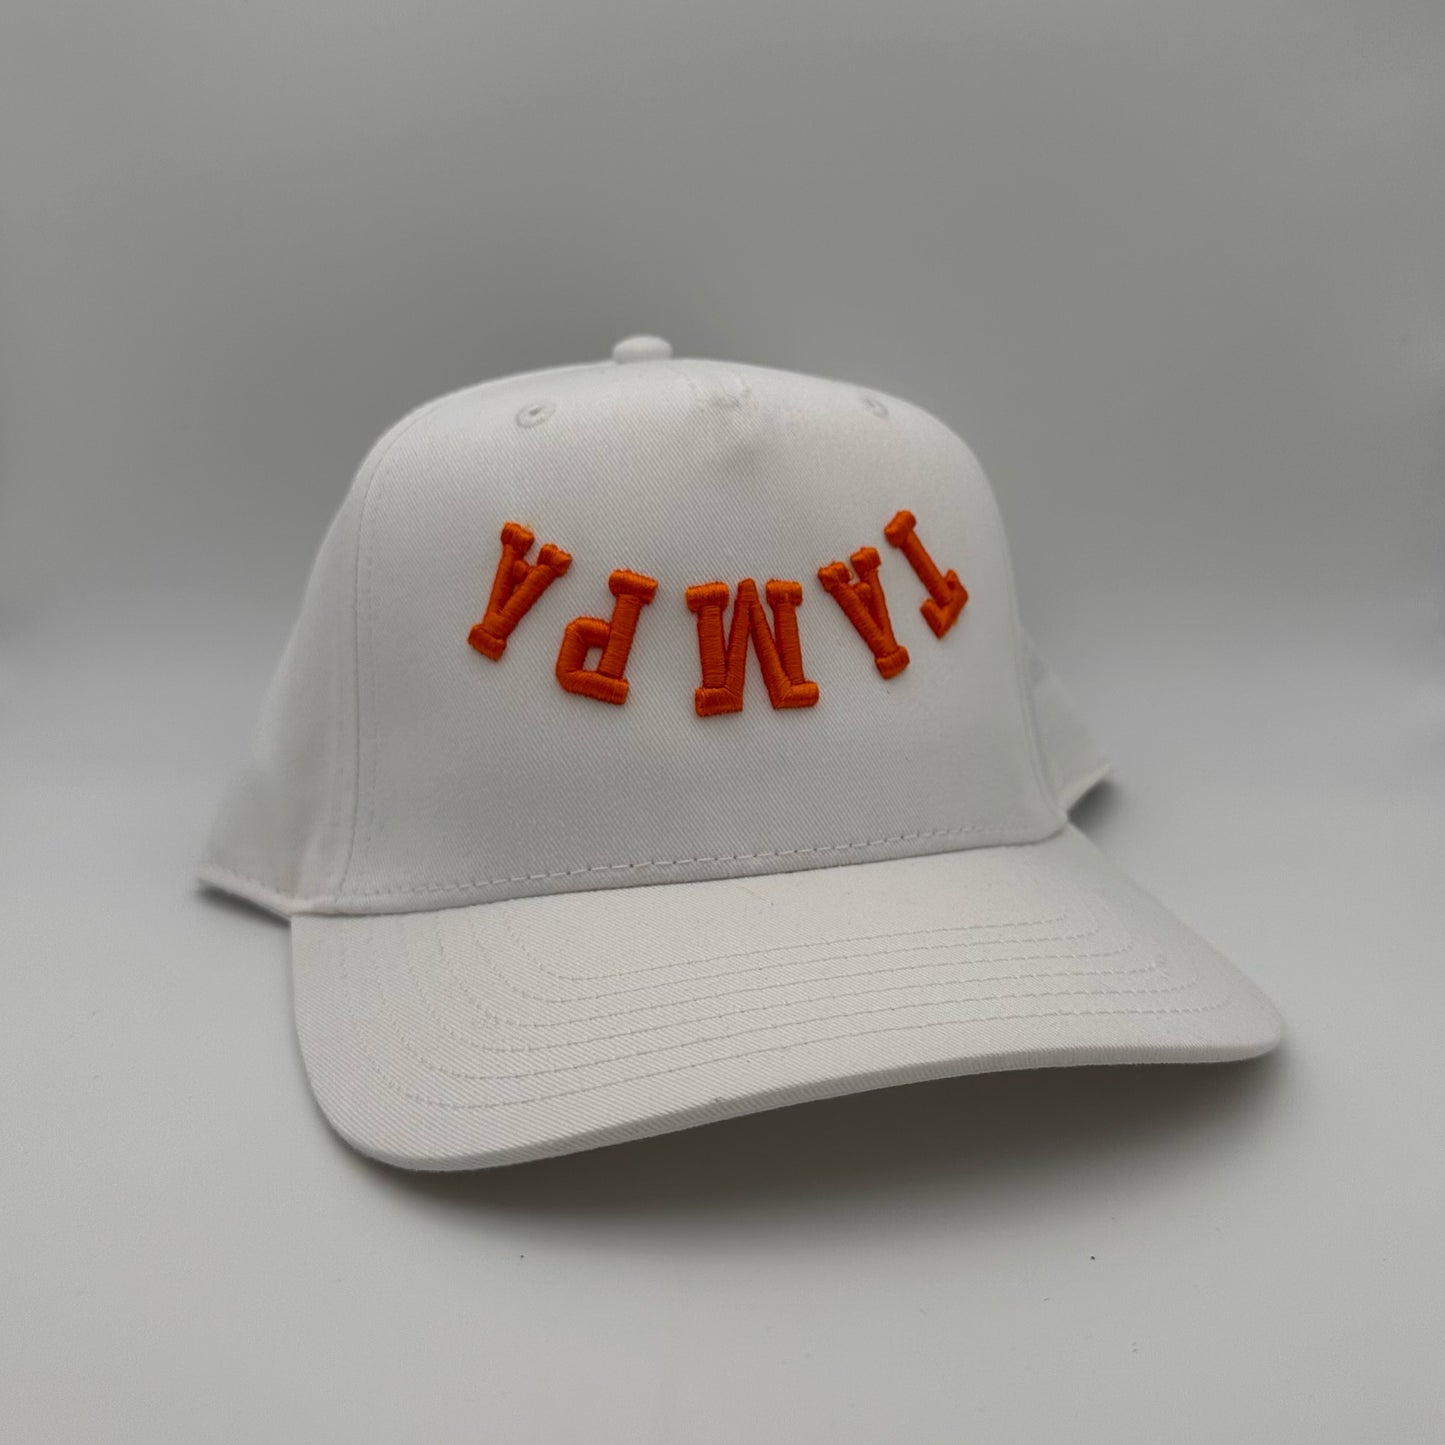 The Tampa Hat - Creamsicle